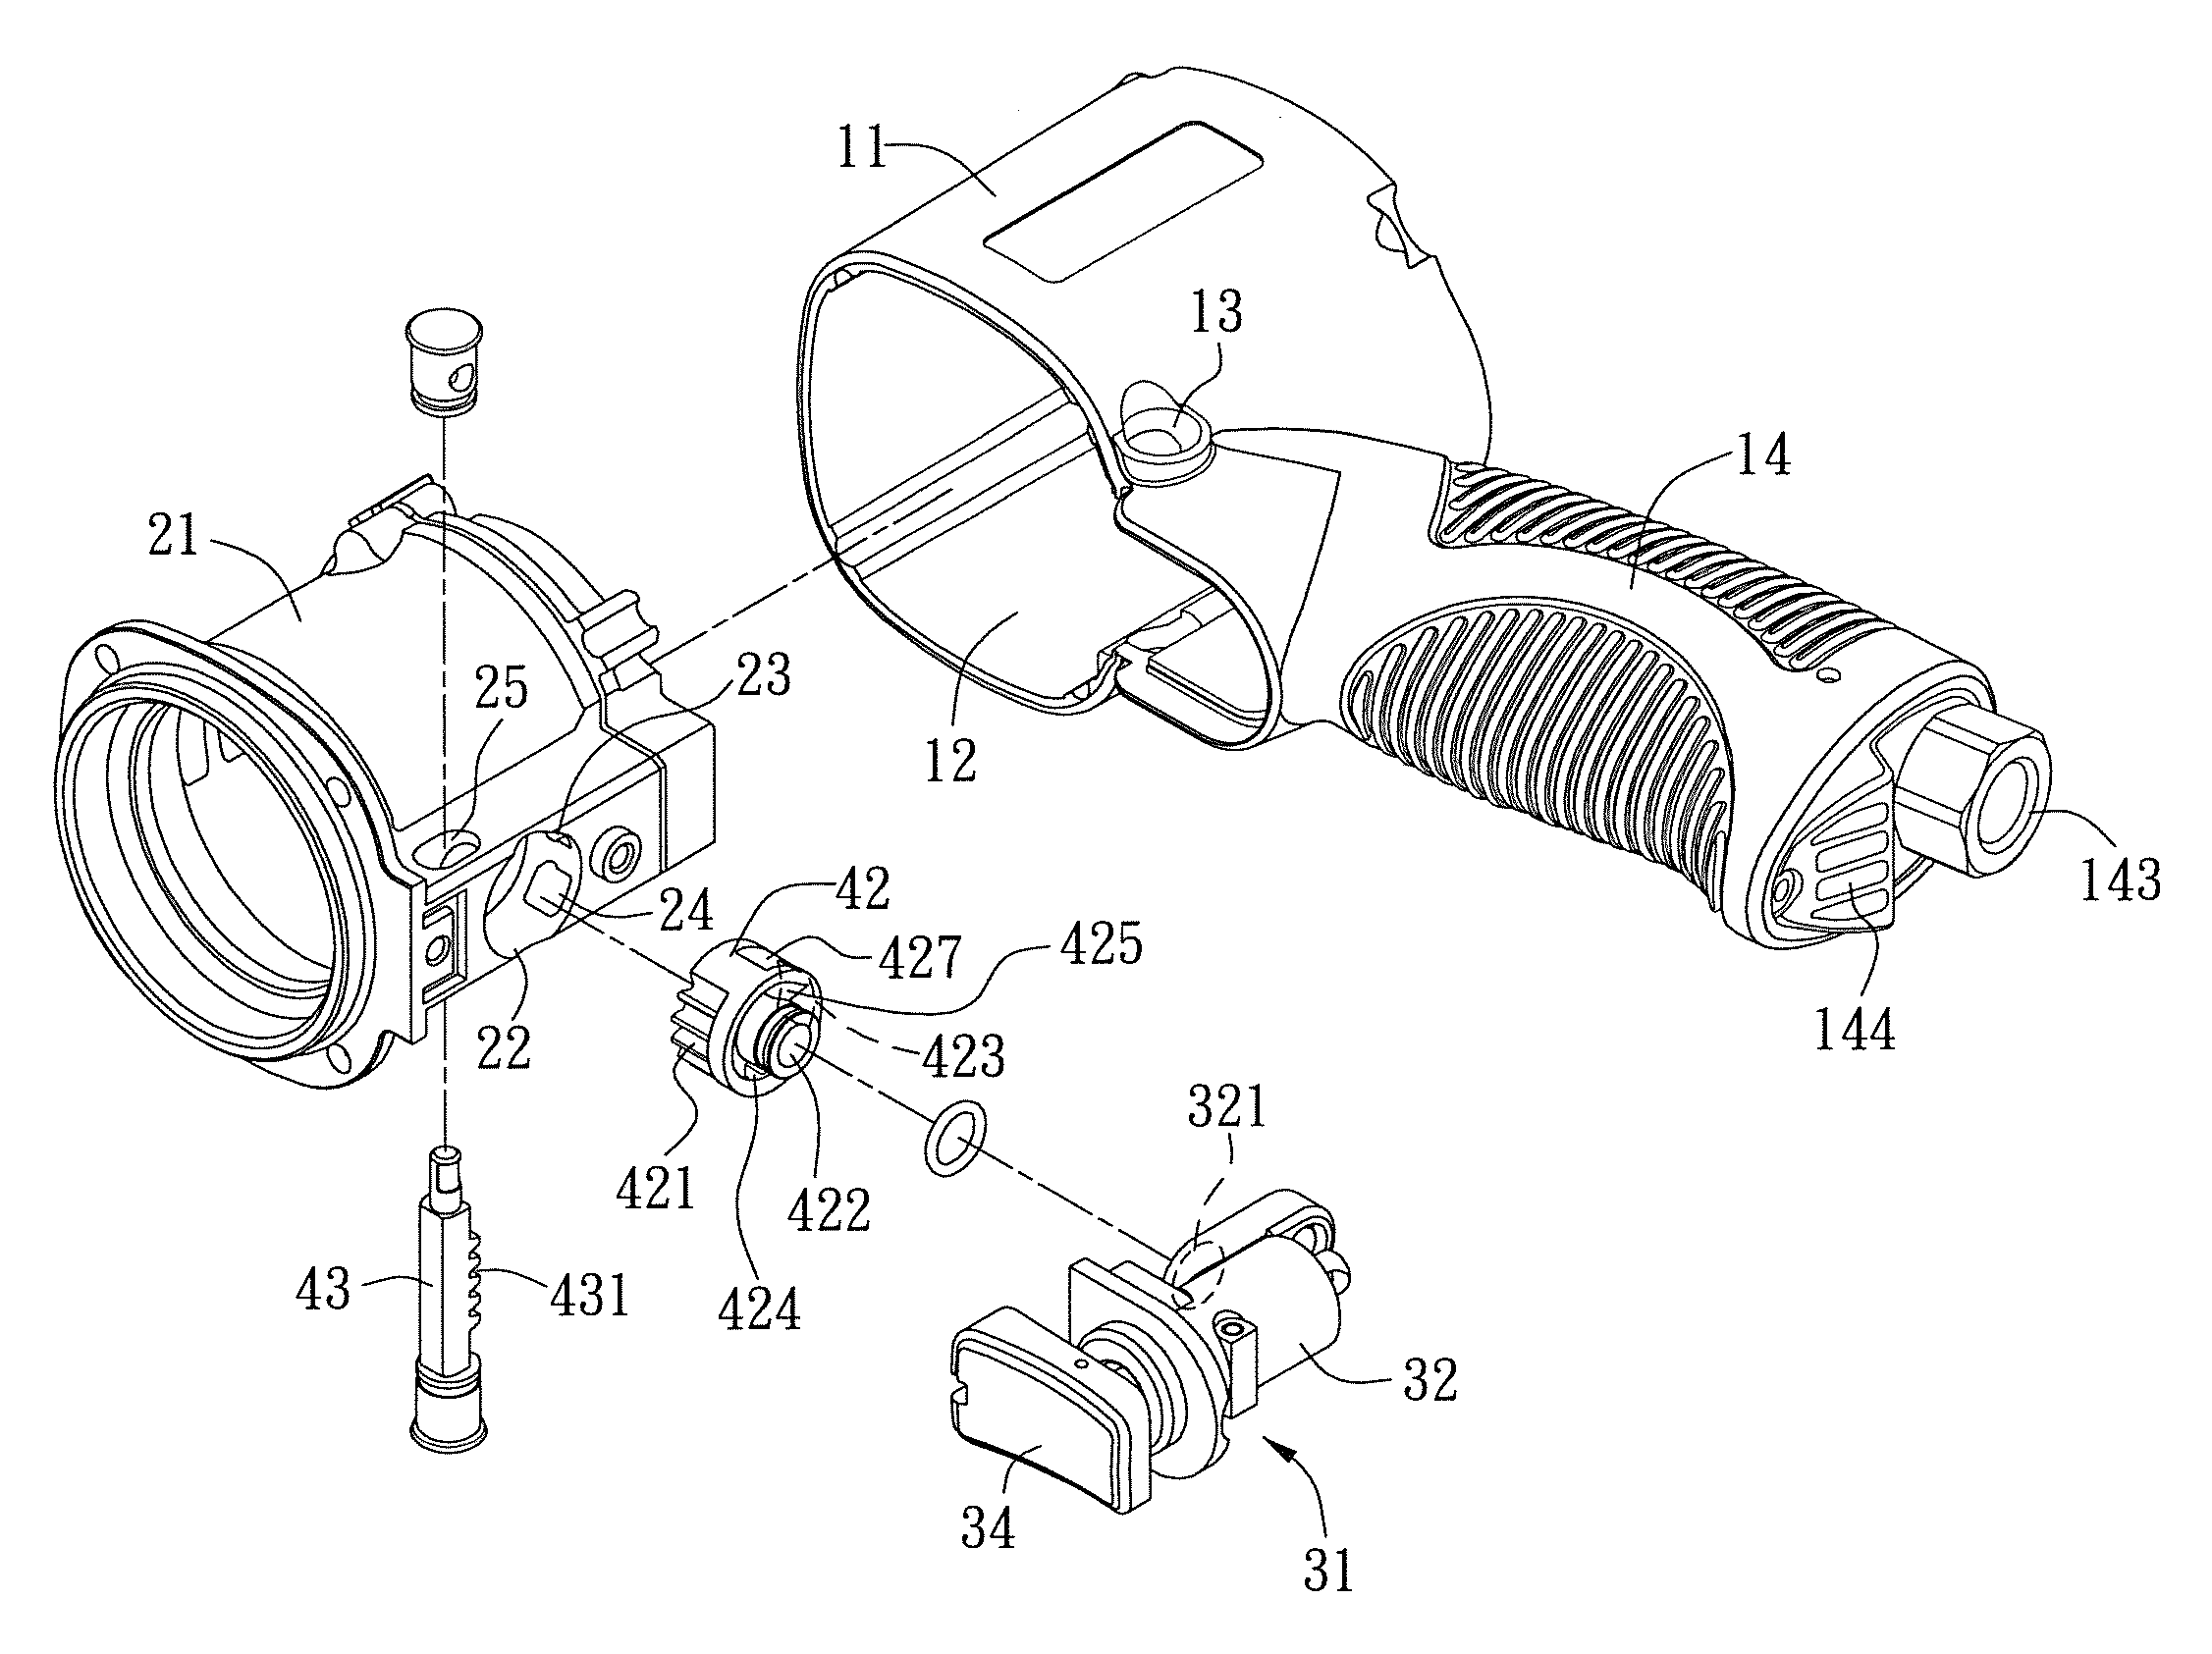 Impact wrench with improved redirection switch